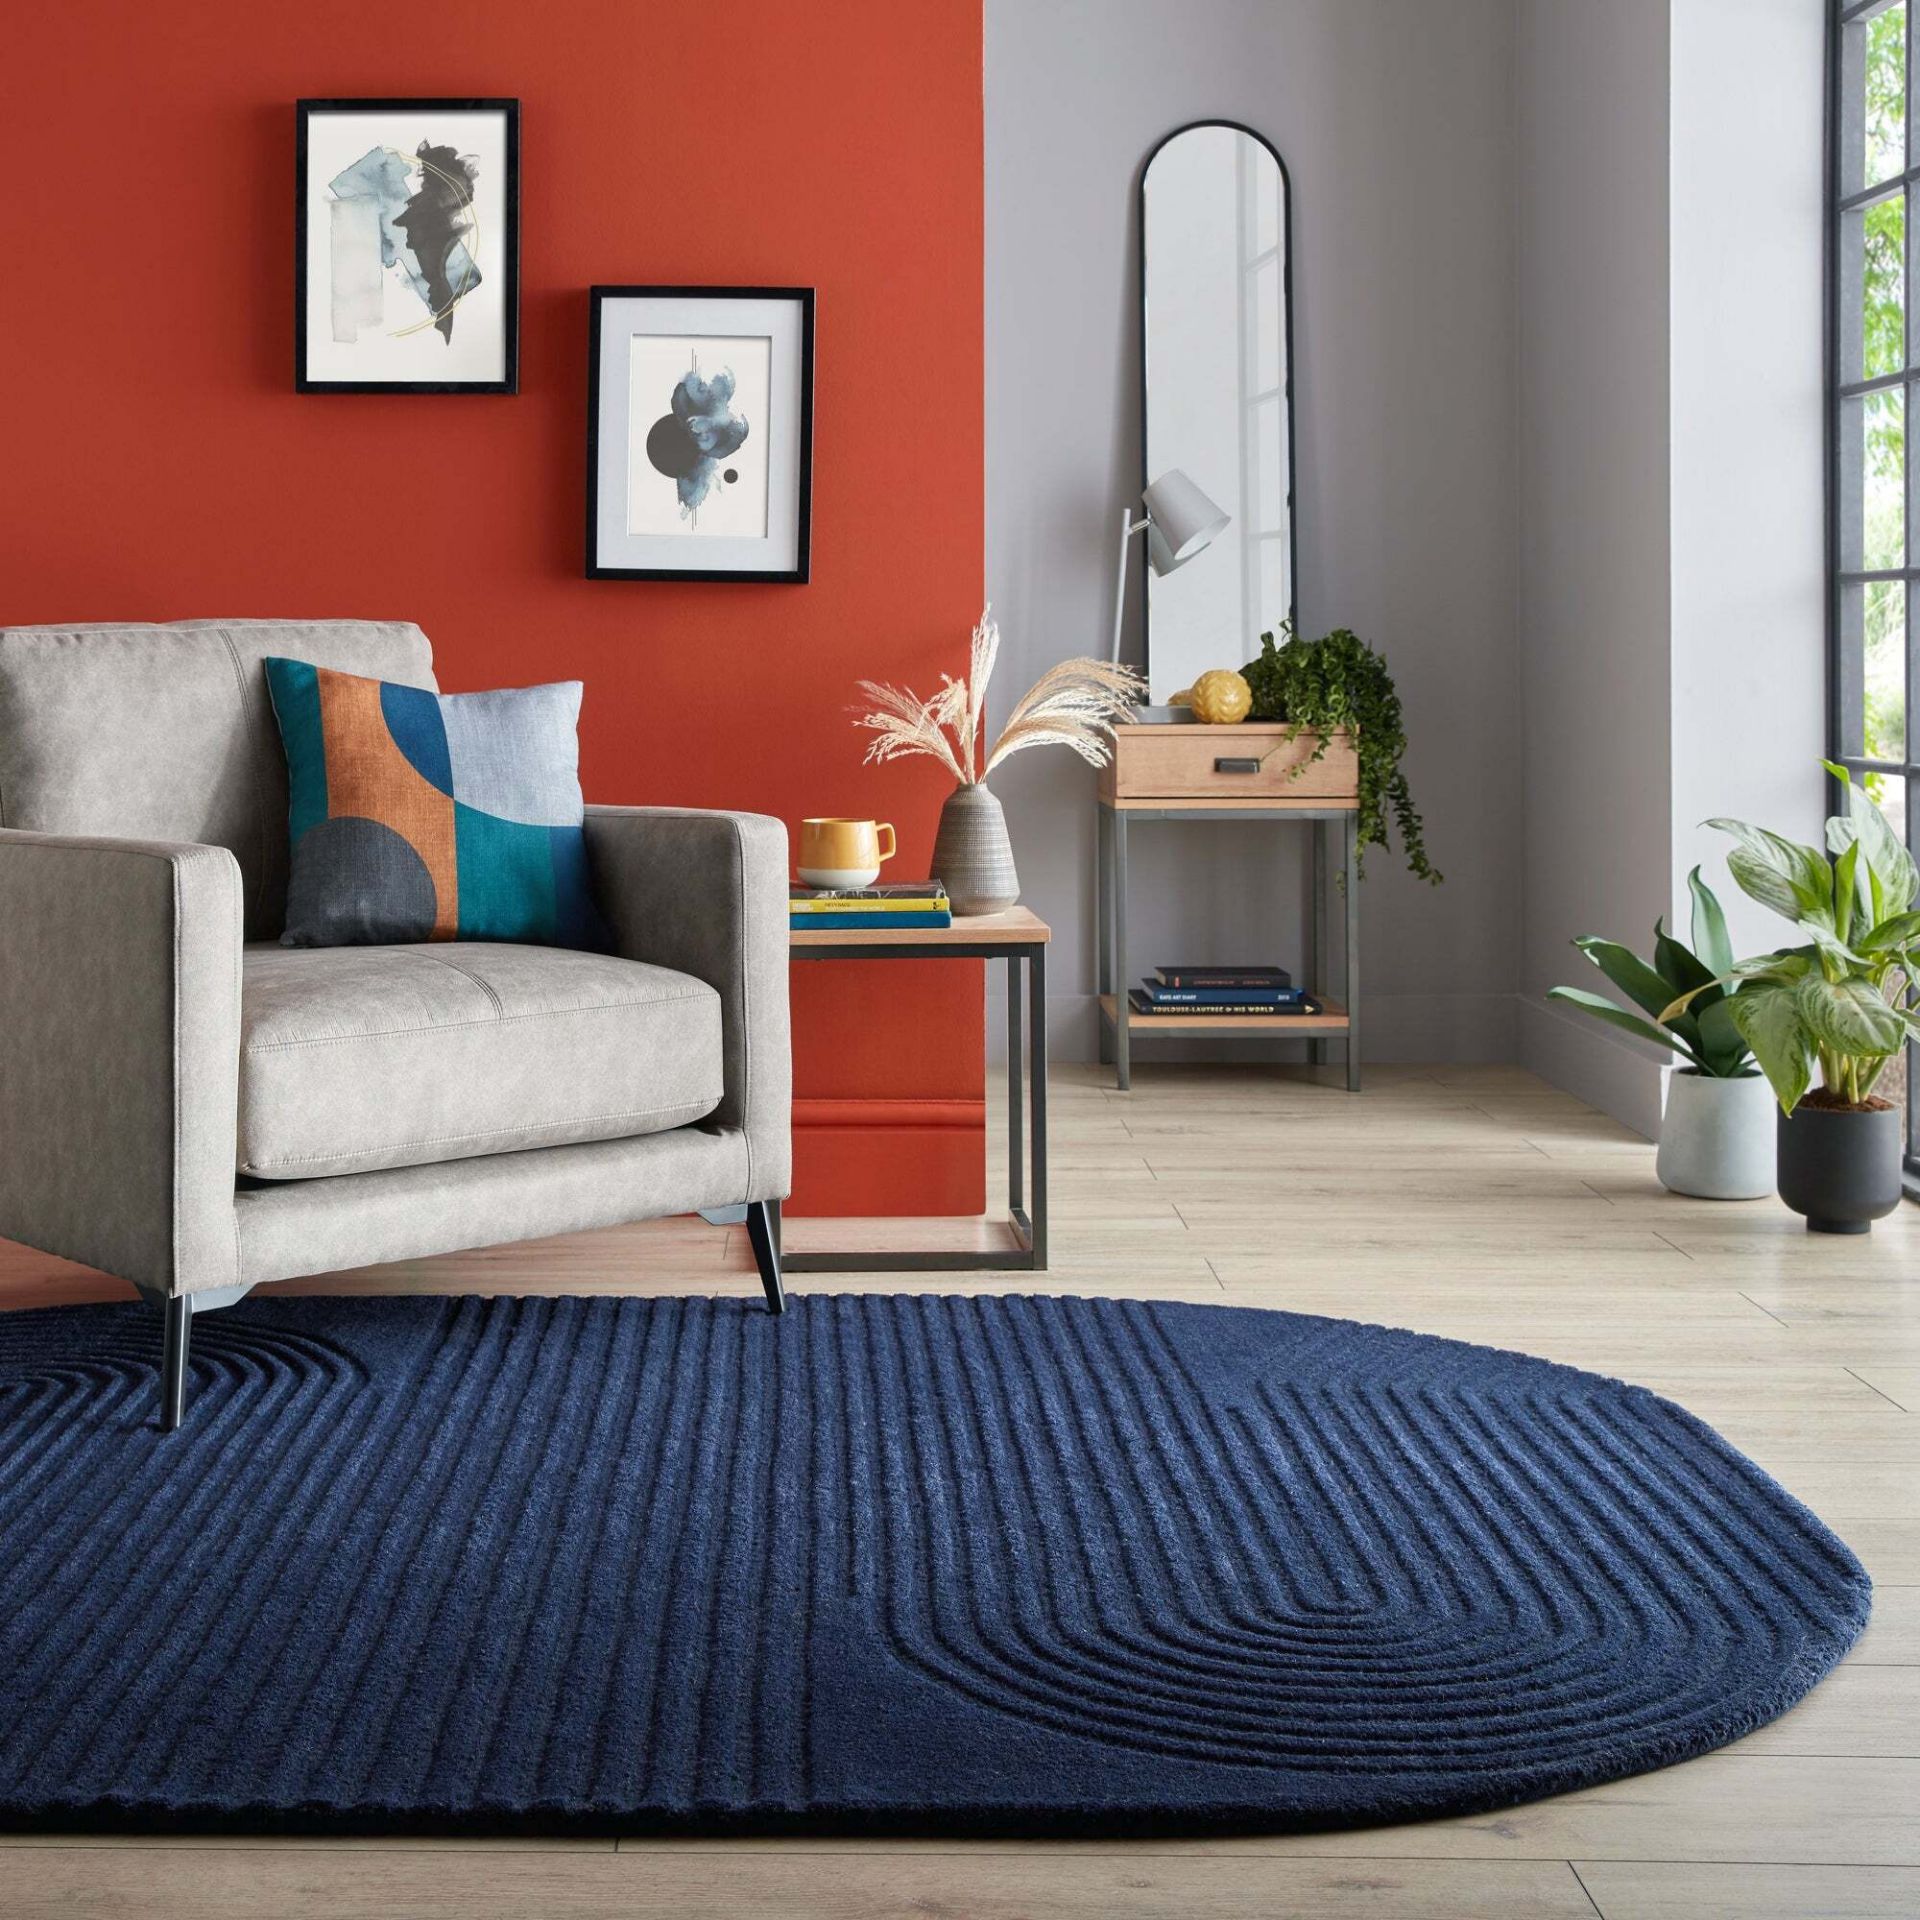 Libre D040 Elements Fard Wool Rug In Navy 120X170Cm RRP 85 About the Product(s) Range: LIBRE